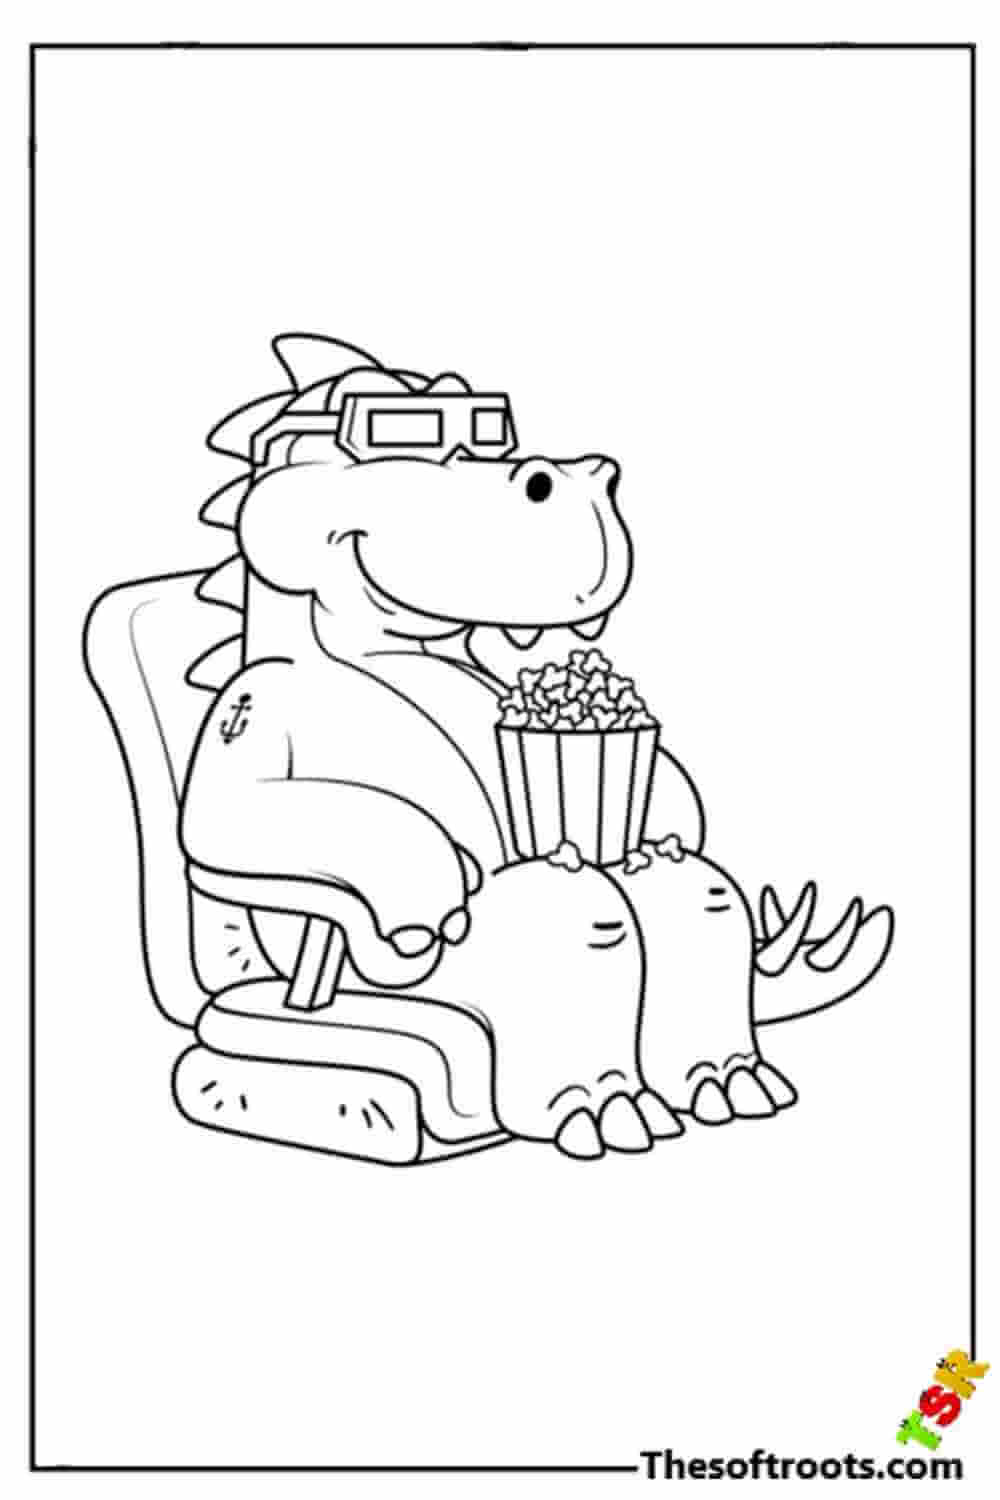 T-Rex Eating Popcorn coloring pages